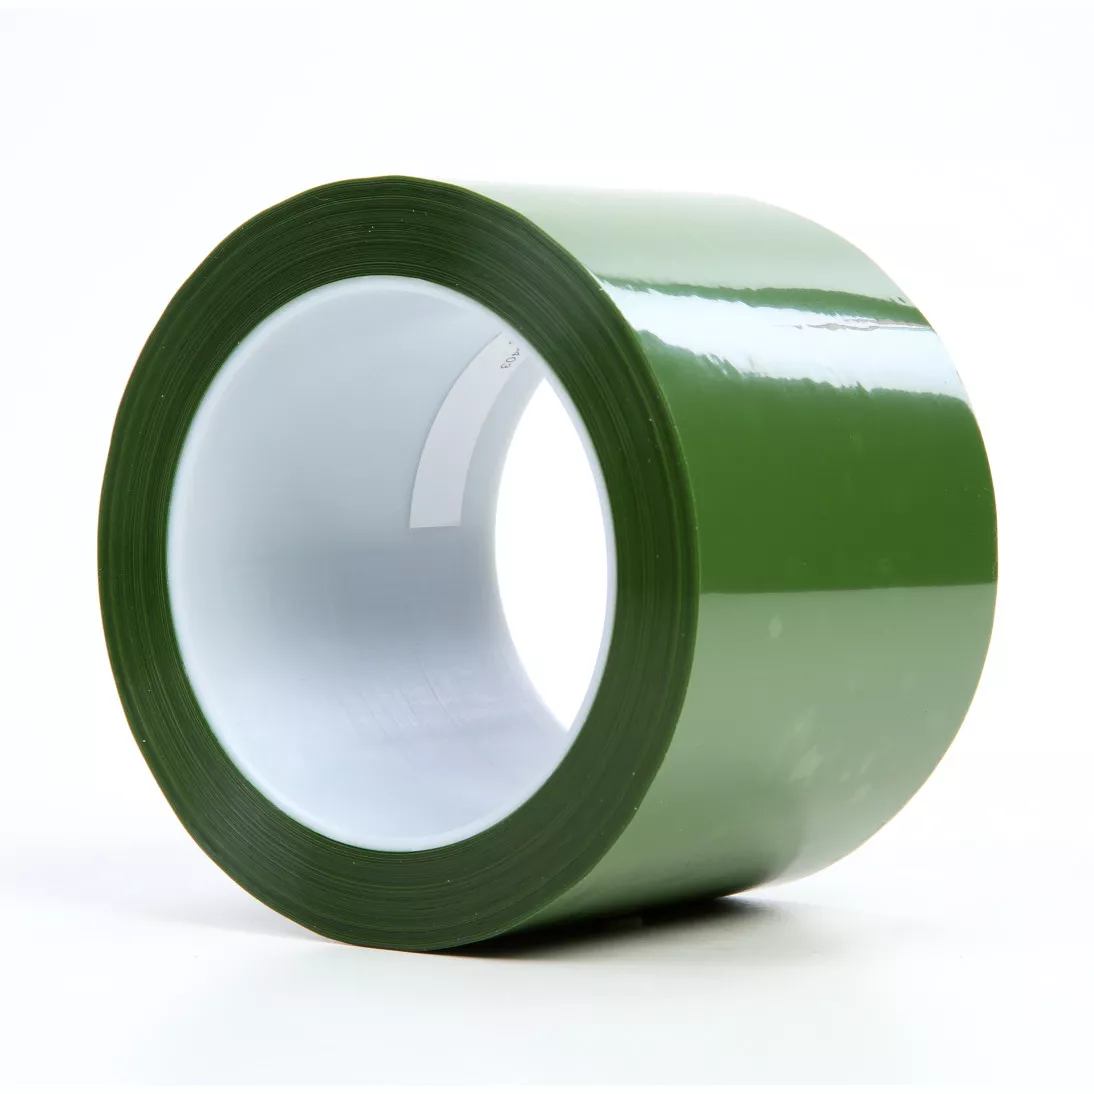 3M™ Polyester Tape 8403, Green, 3 in x 72 yd, 2.4 mil, 12 rolls per case